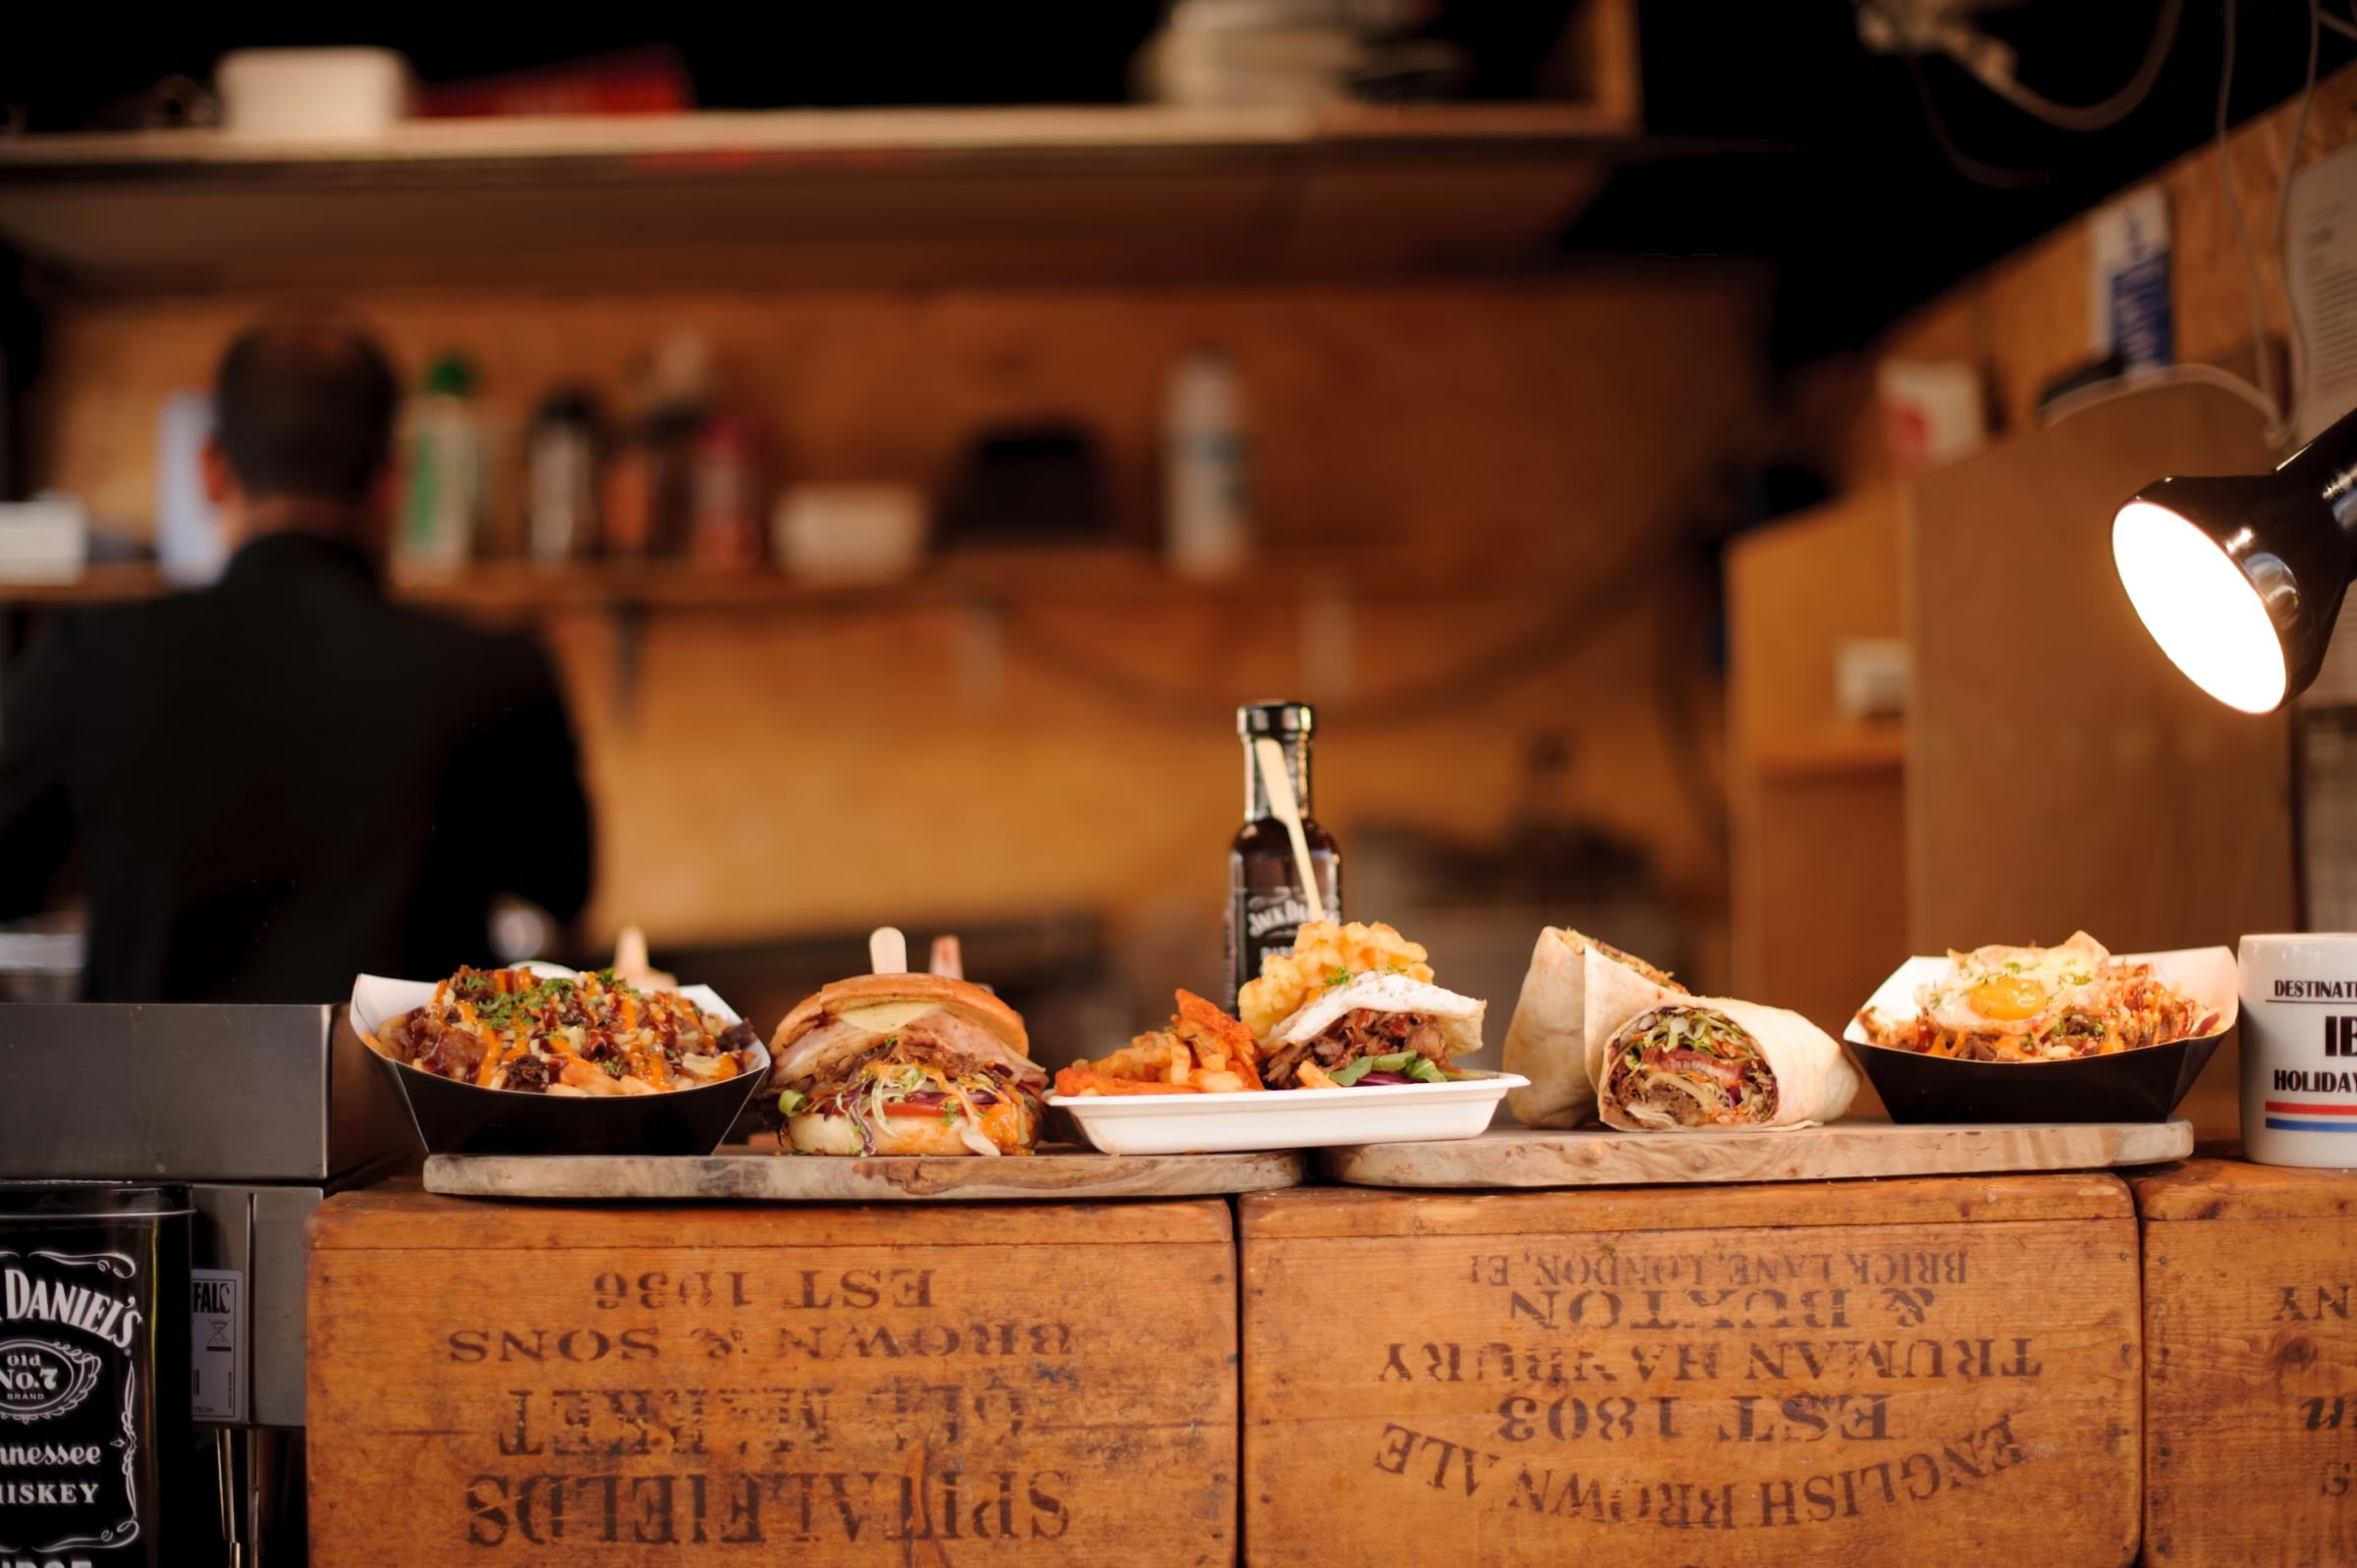 A new street food market is launching in April